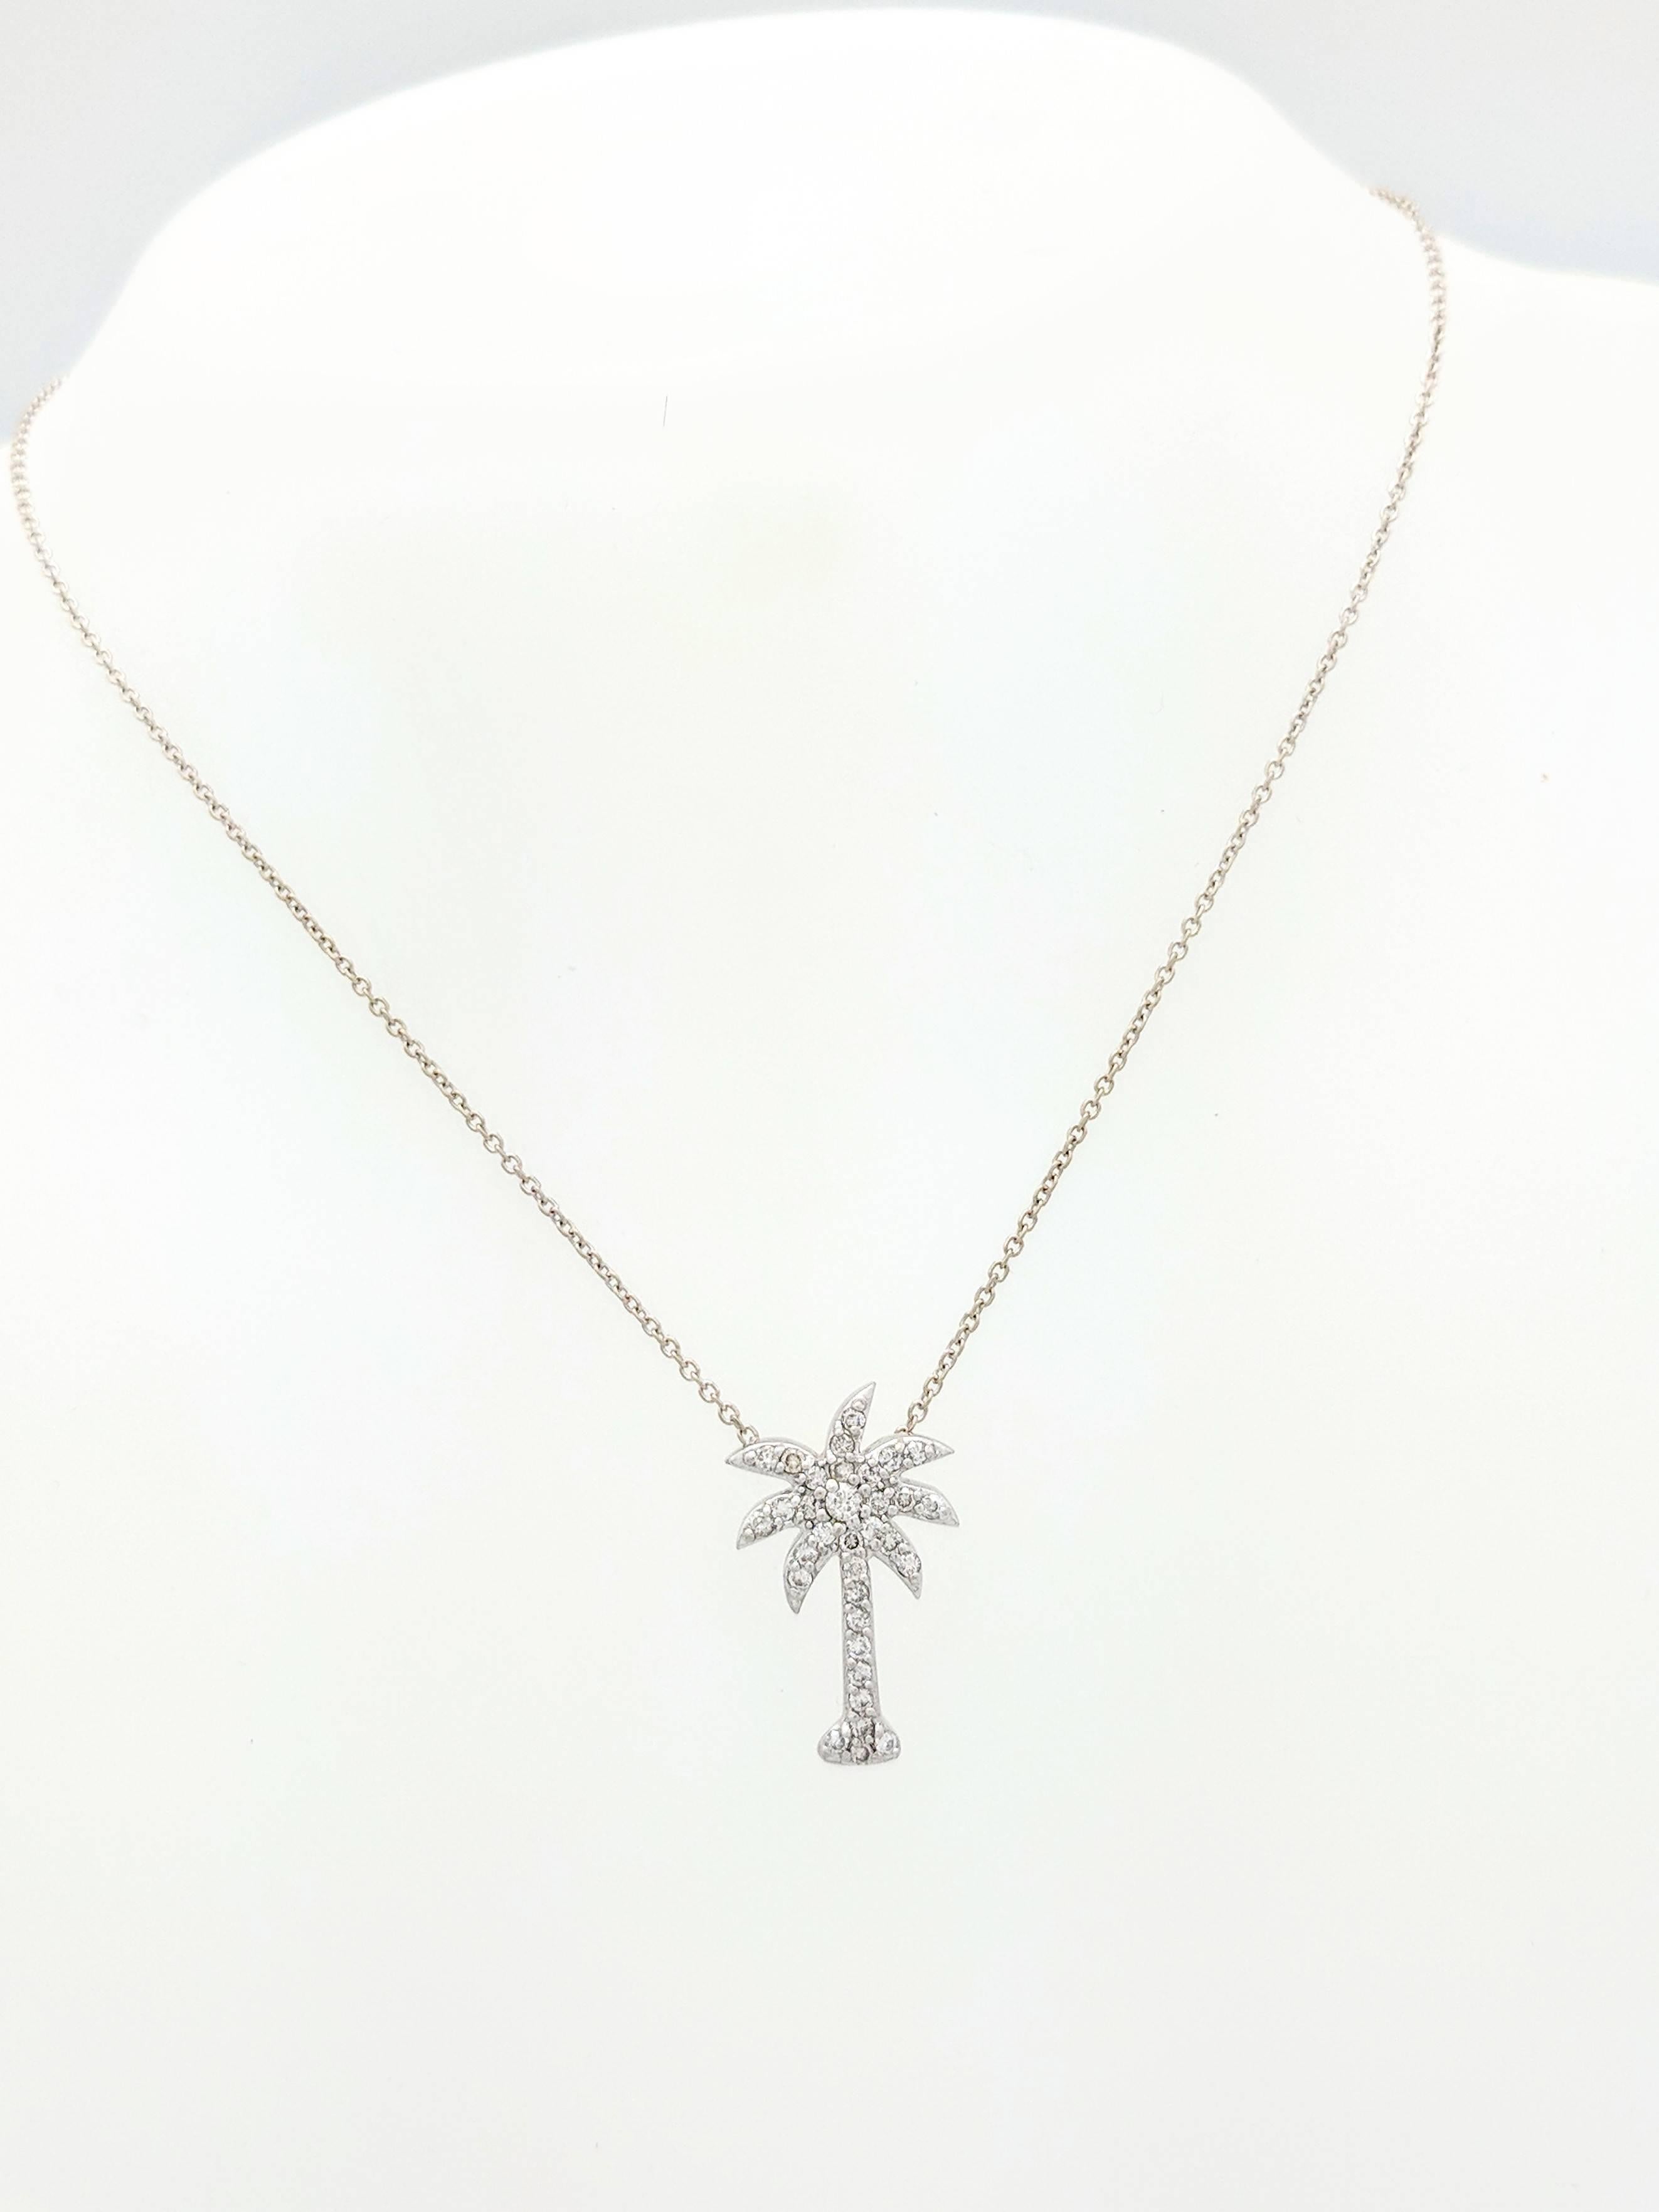 14K White Gold Diamond Encrusted Palm Tree Pendant Necklace

You are viewing a beautiful diamond encrusted palm tree pendant necklace. This piece is crafted from 14k white gold and weighs 3.8 grams. The pendant features (33) round natural brilliant